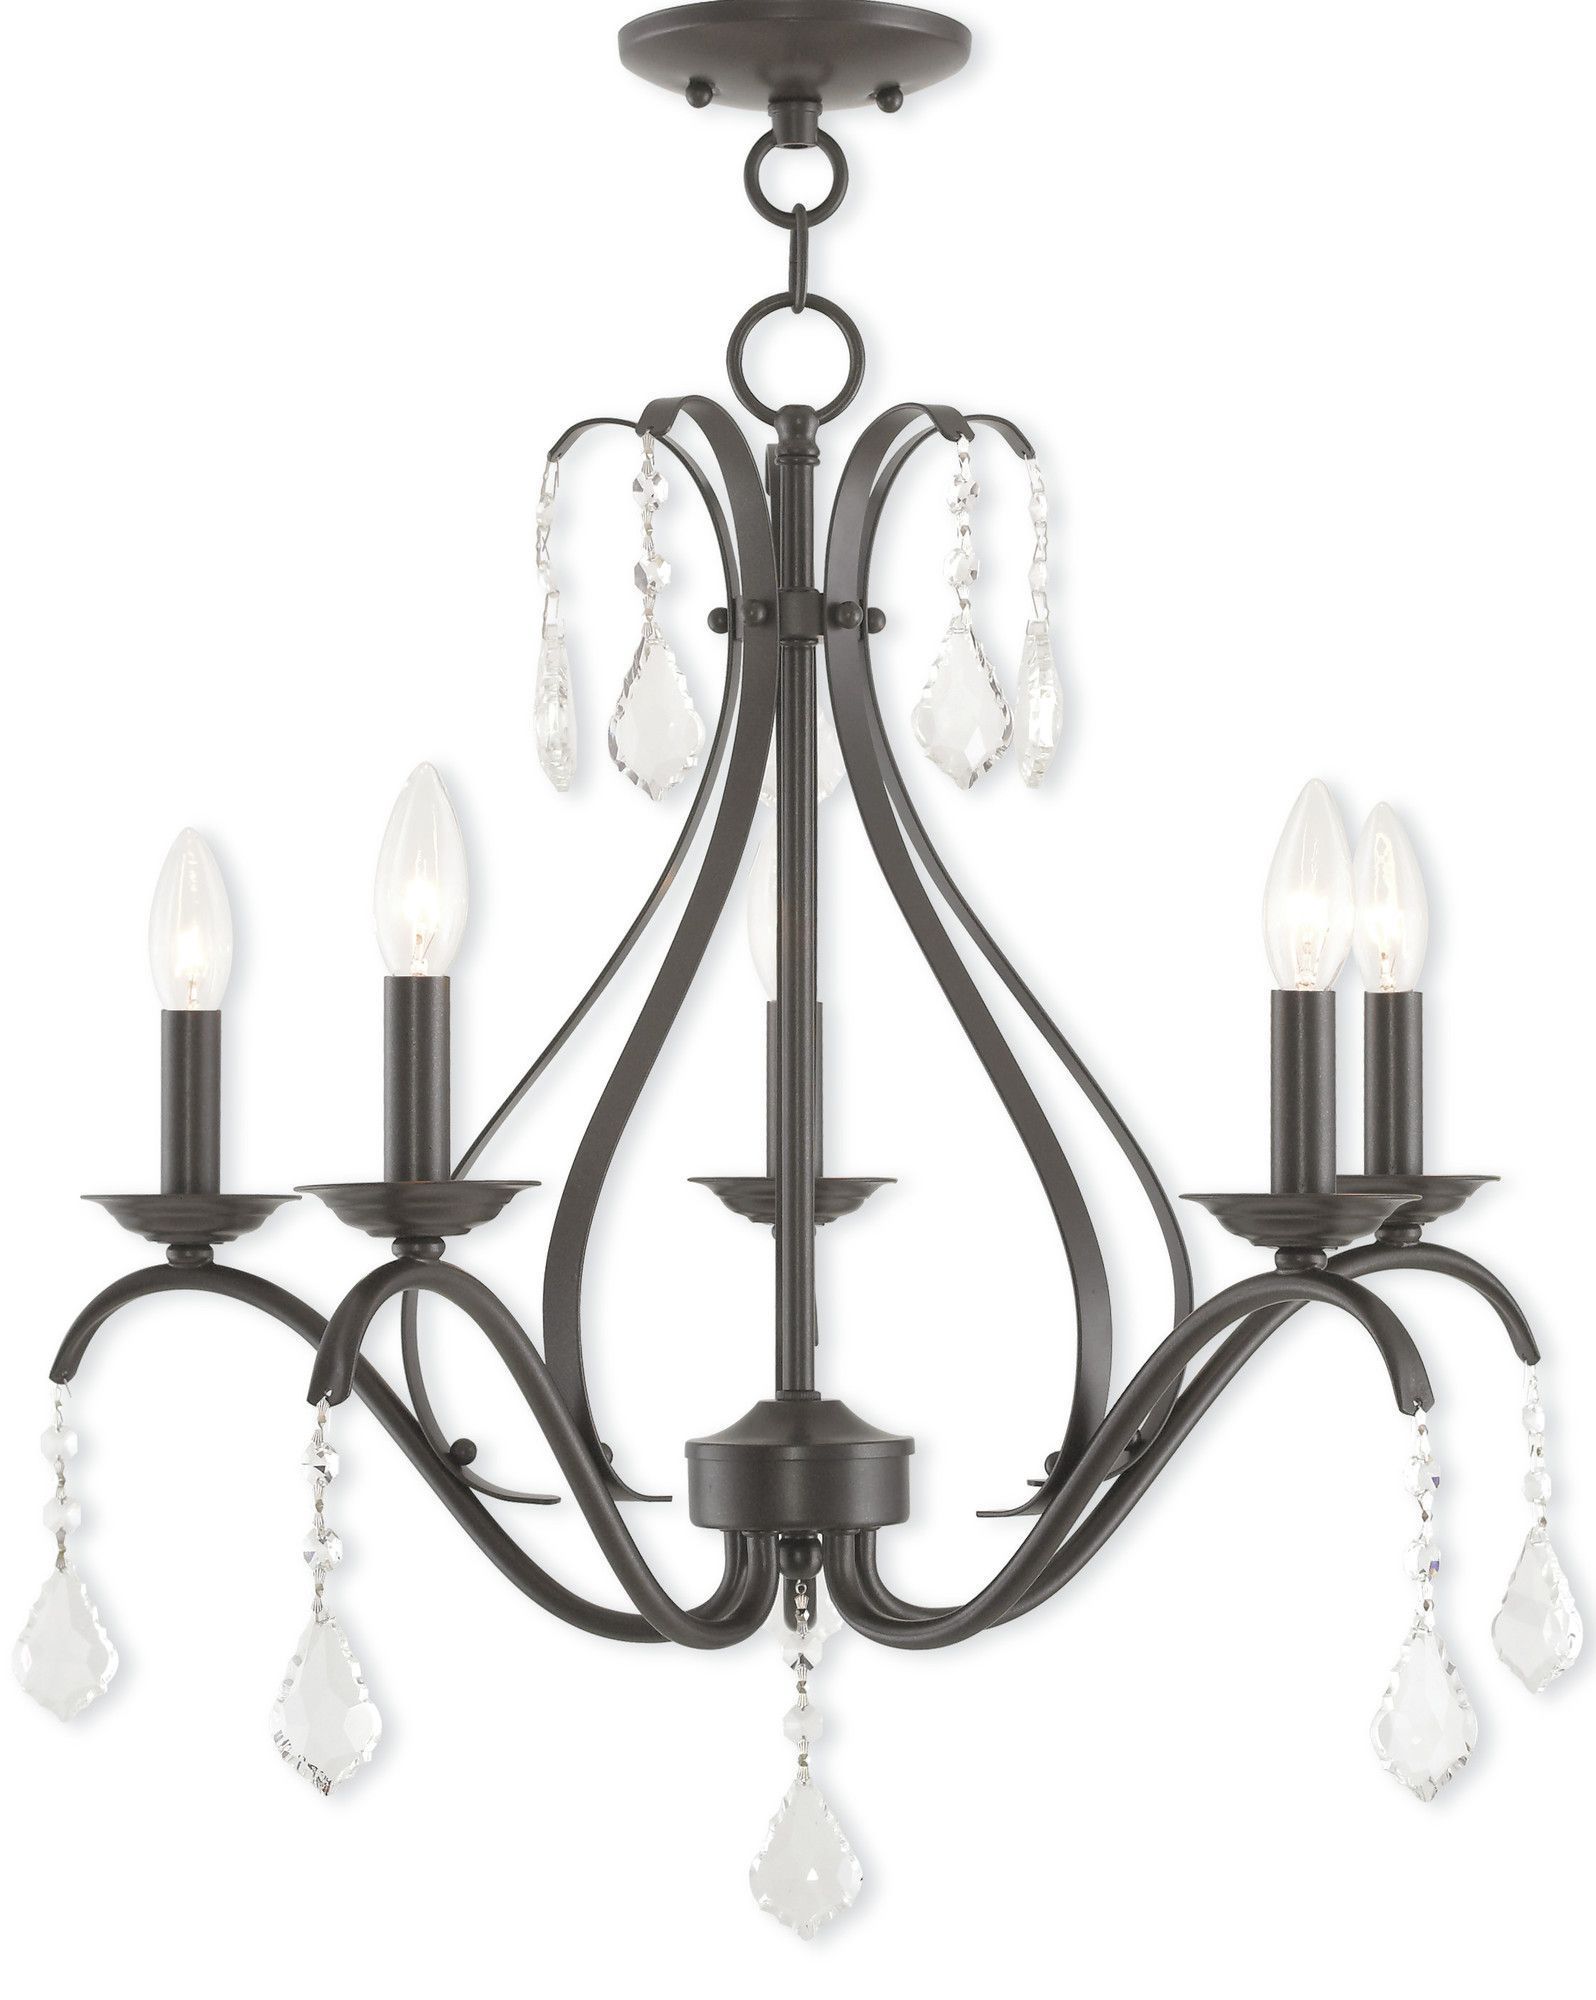 Caterina 5 Light Crystal Chandelier | Products Within Bouchette Traditional 6 Light Candle Style Chandeliers (View 22 of 30)